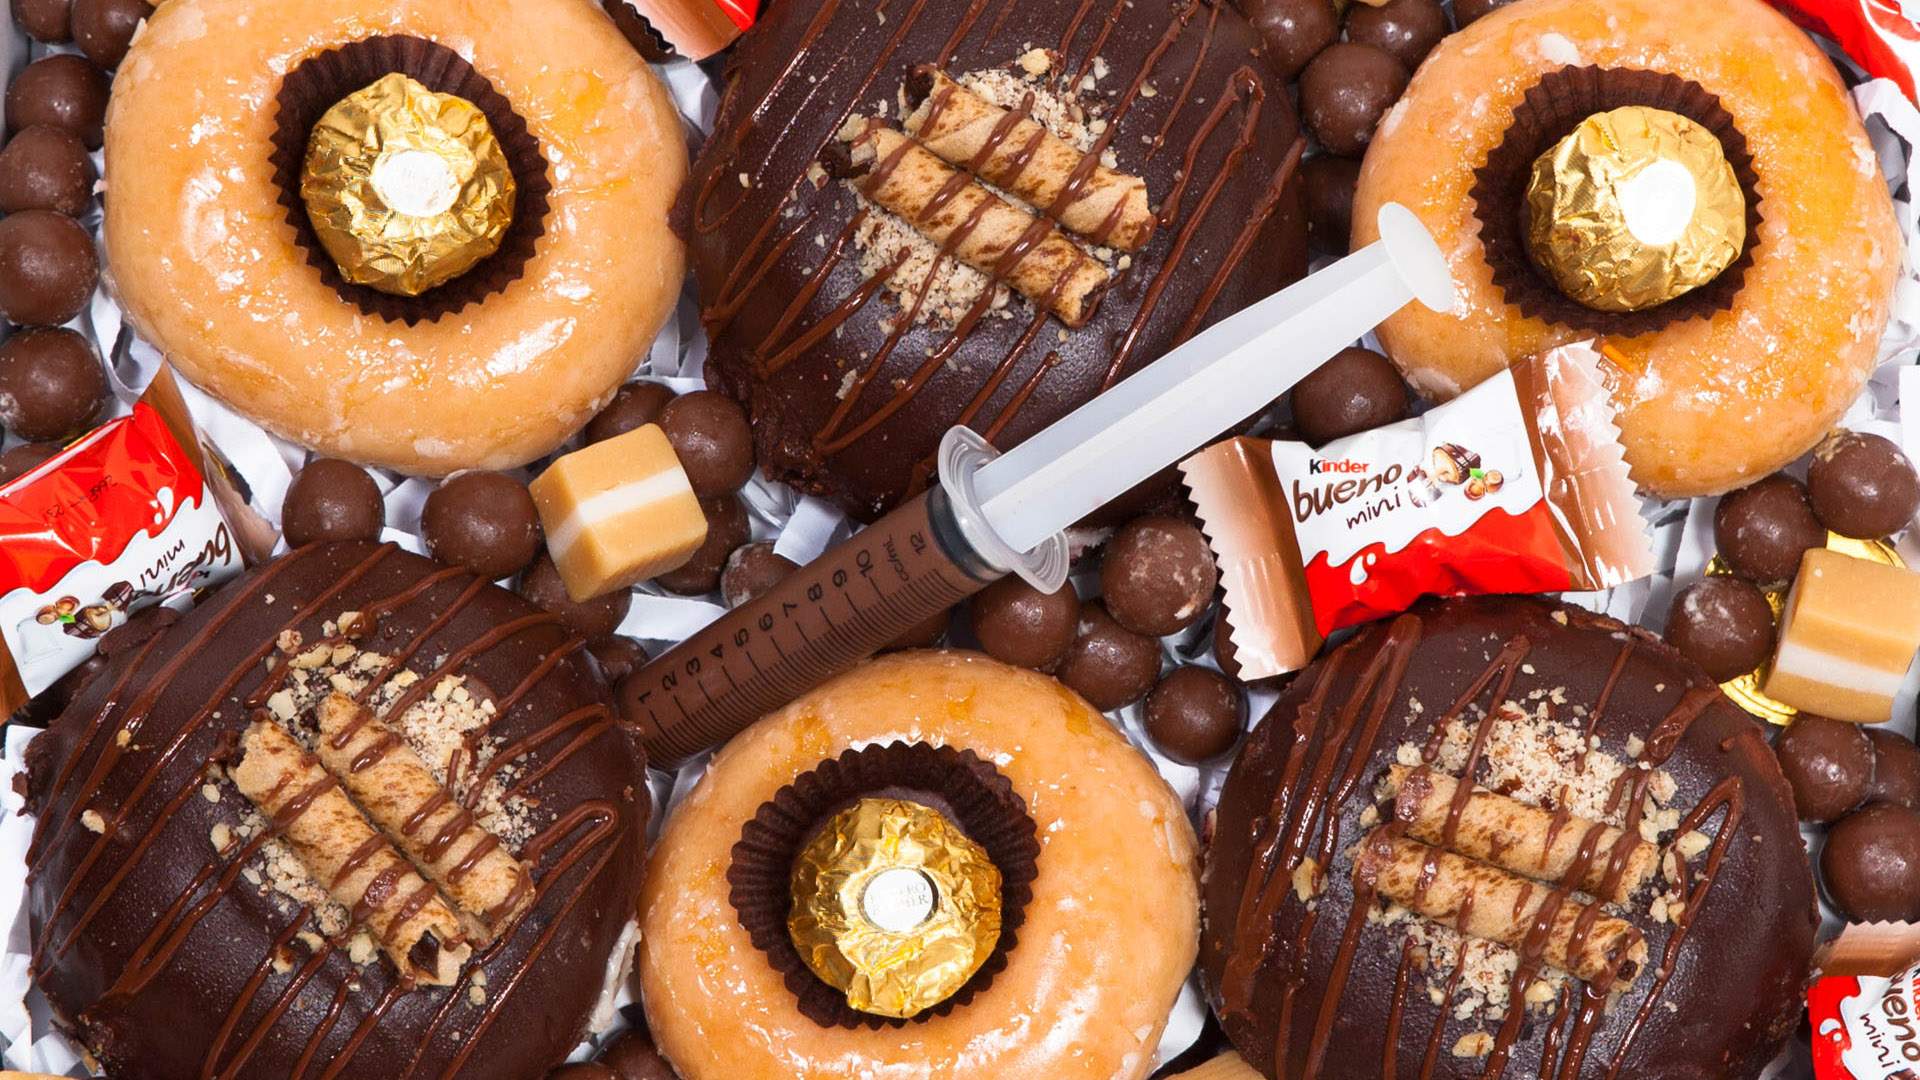 Sweety's Treat Boxes Is Brisbane's New Dedicated Doughnut Delivery Service